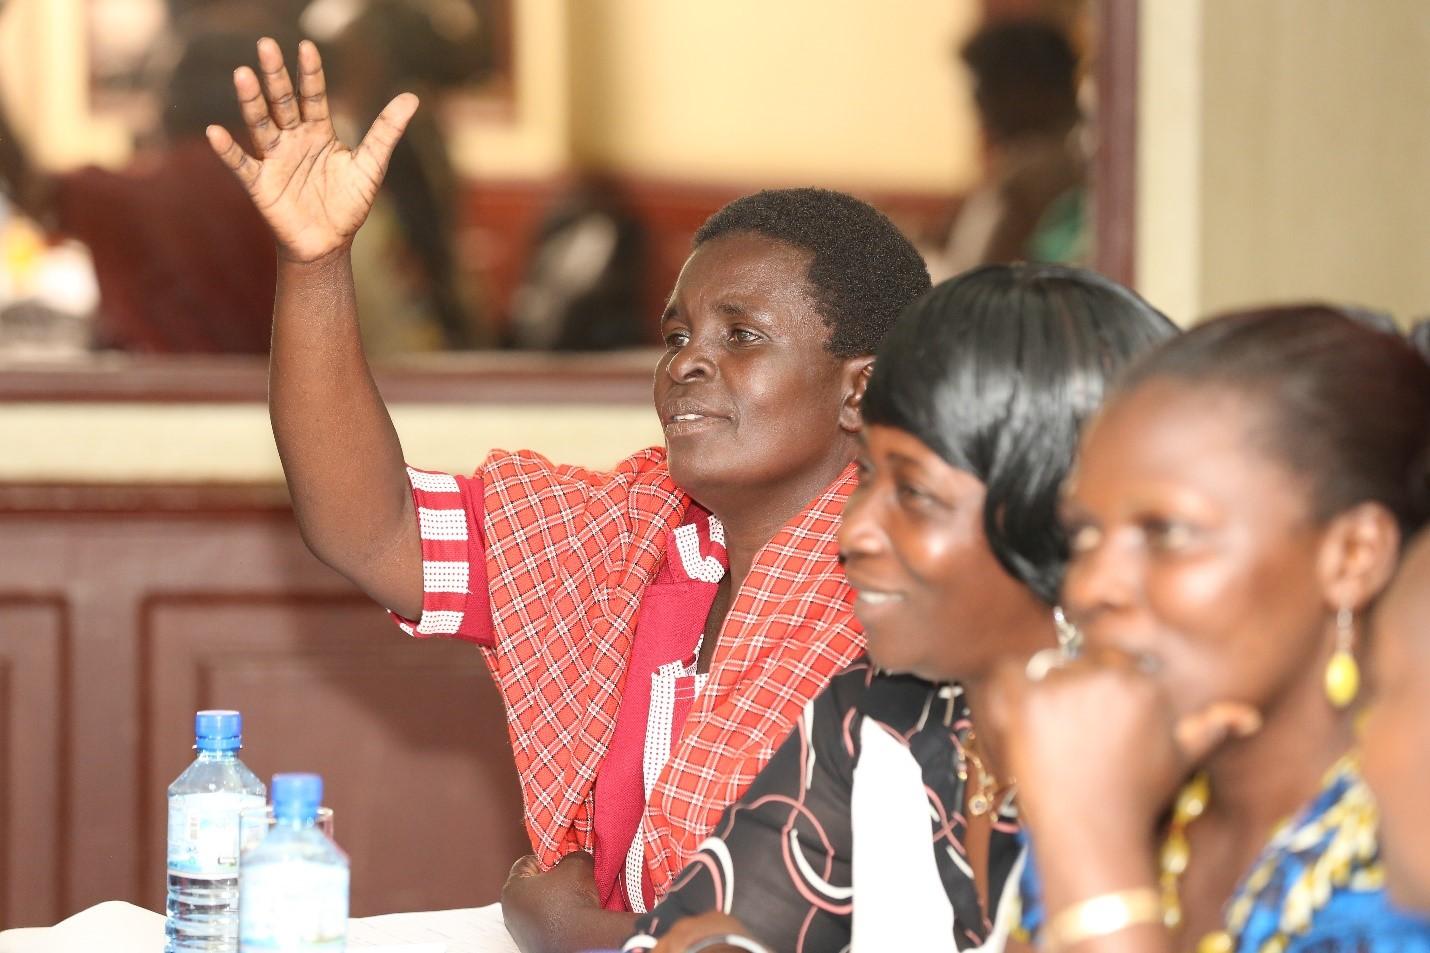 Chama women learn how to engage their local community using voter education.